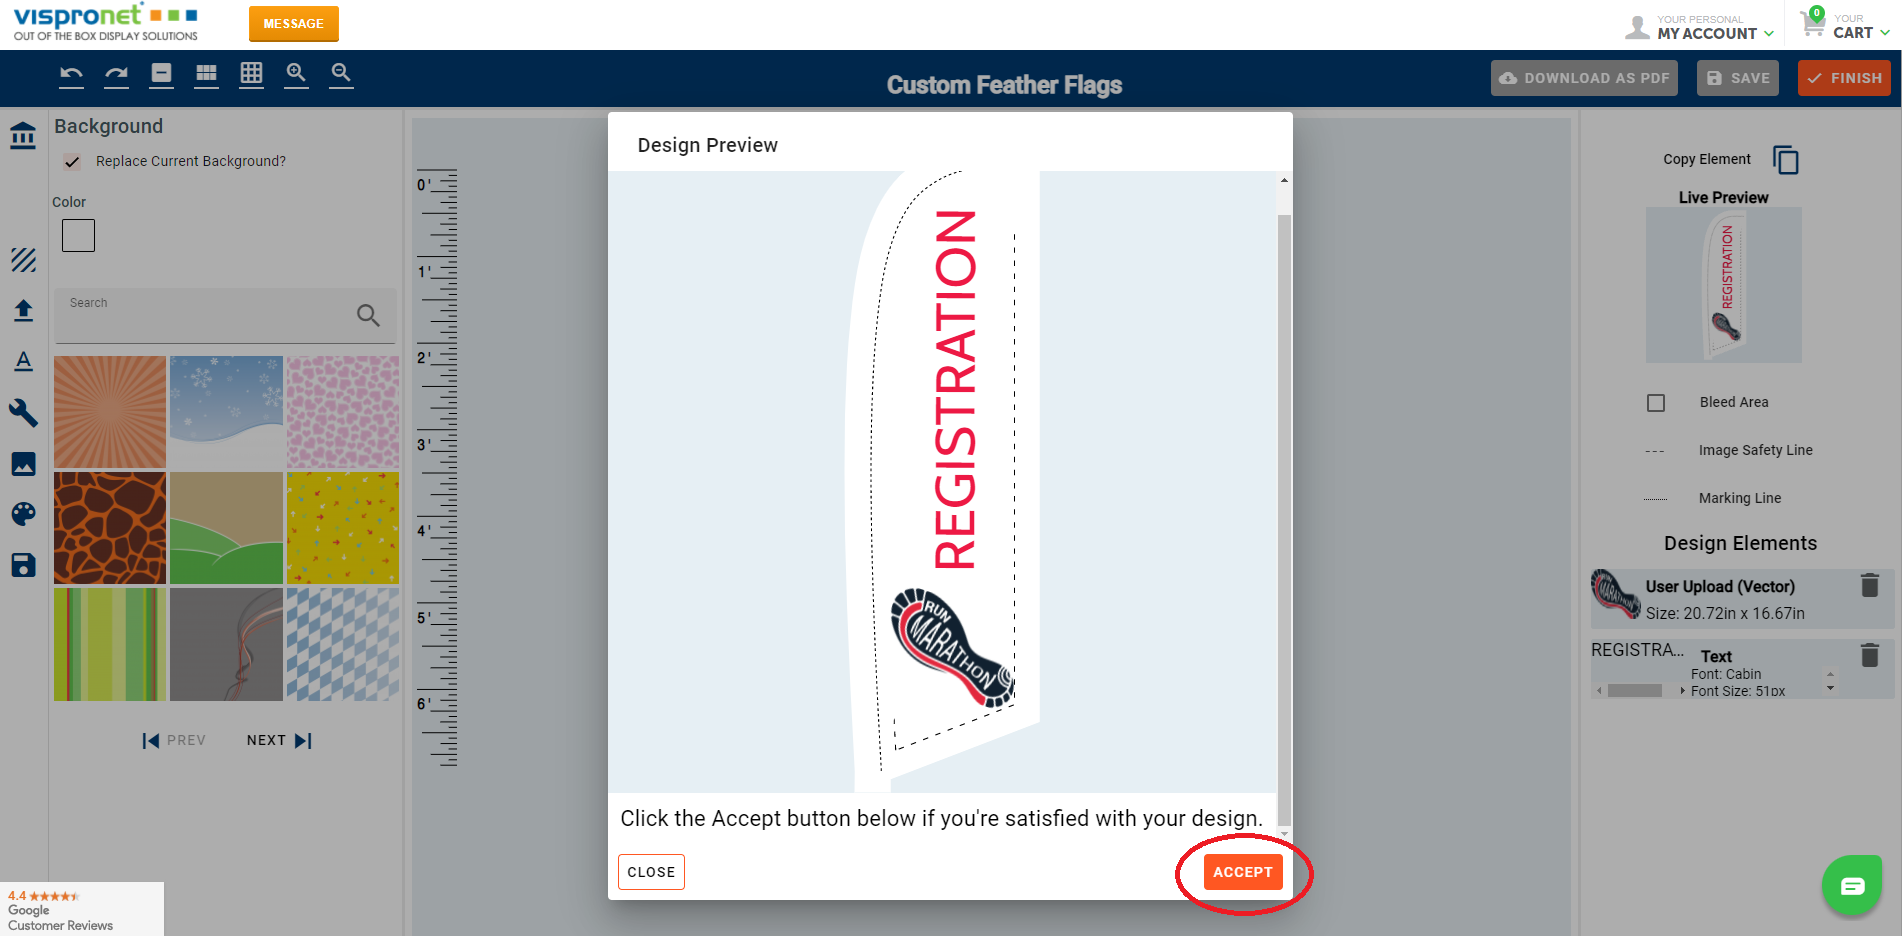 Step 2: View Your Finished Design